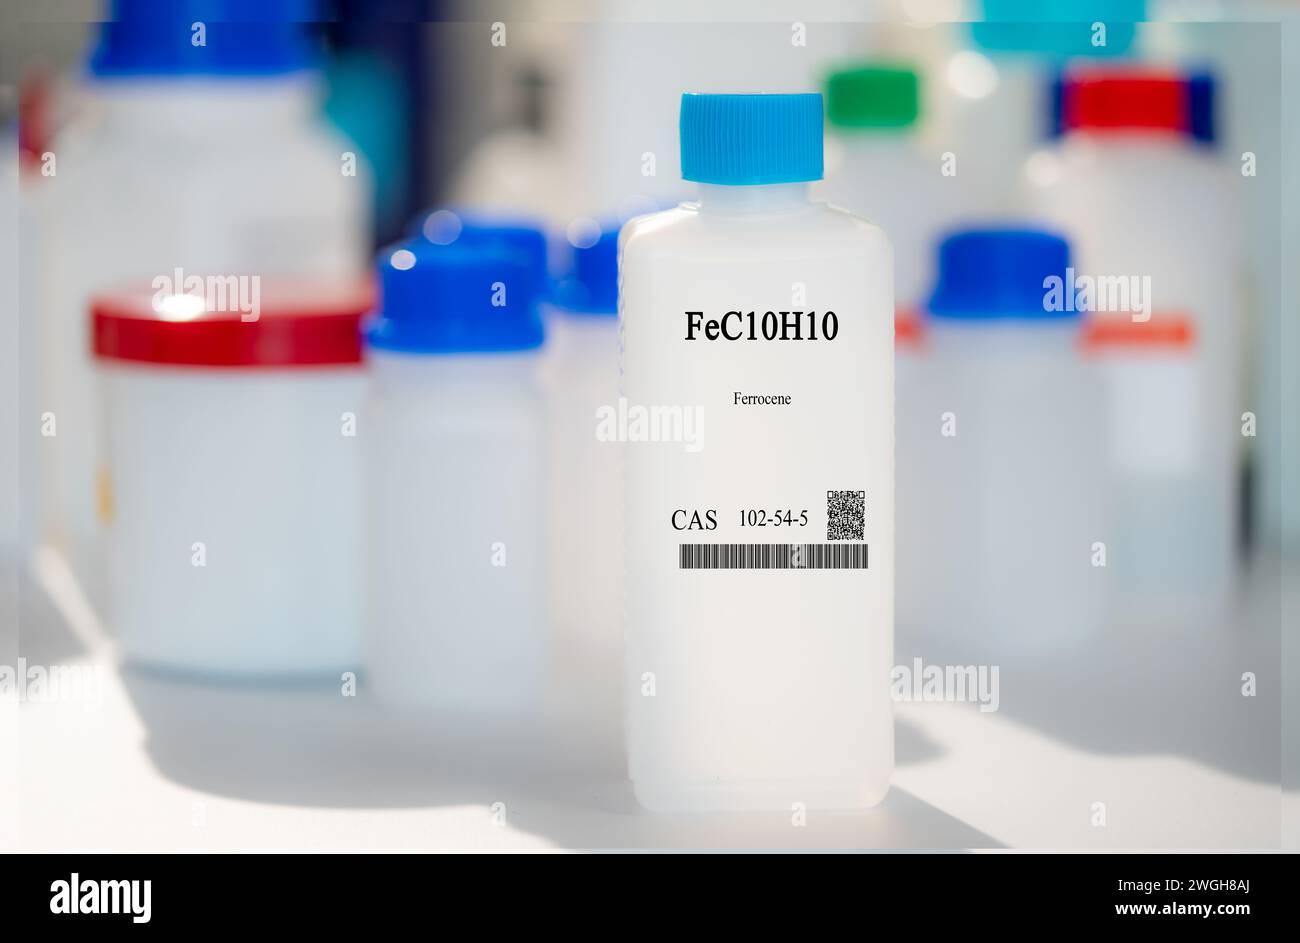 FeC10H10 ferrocene CAS 102-54-5 chemical substance in white plastic laboratory packaging Stock Photo